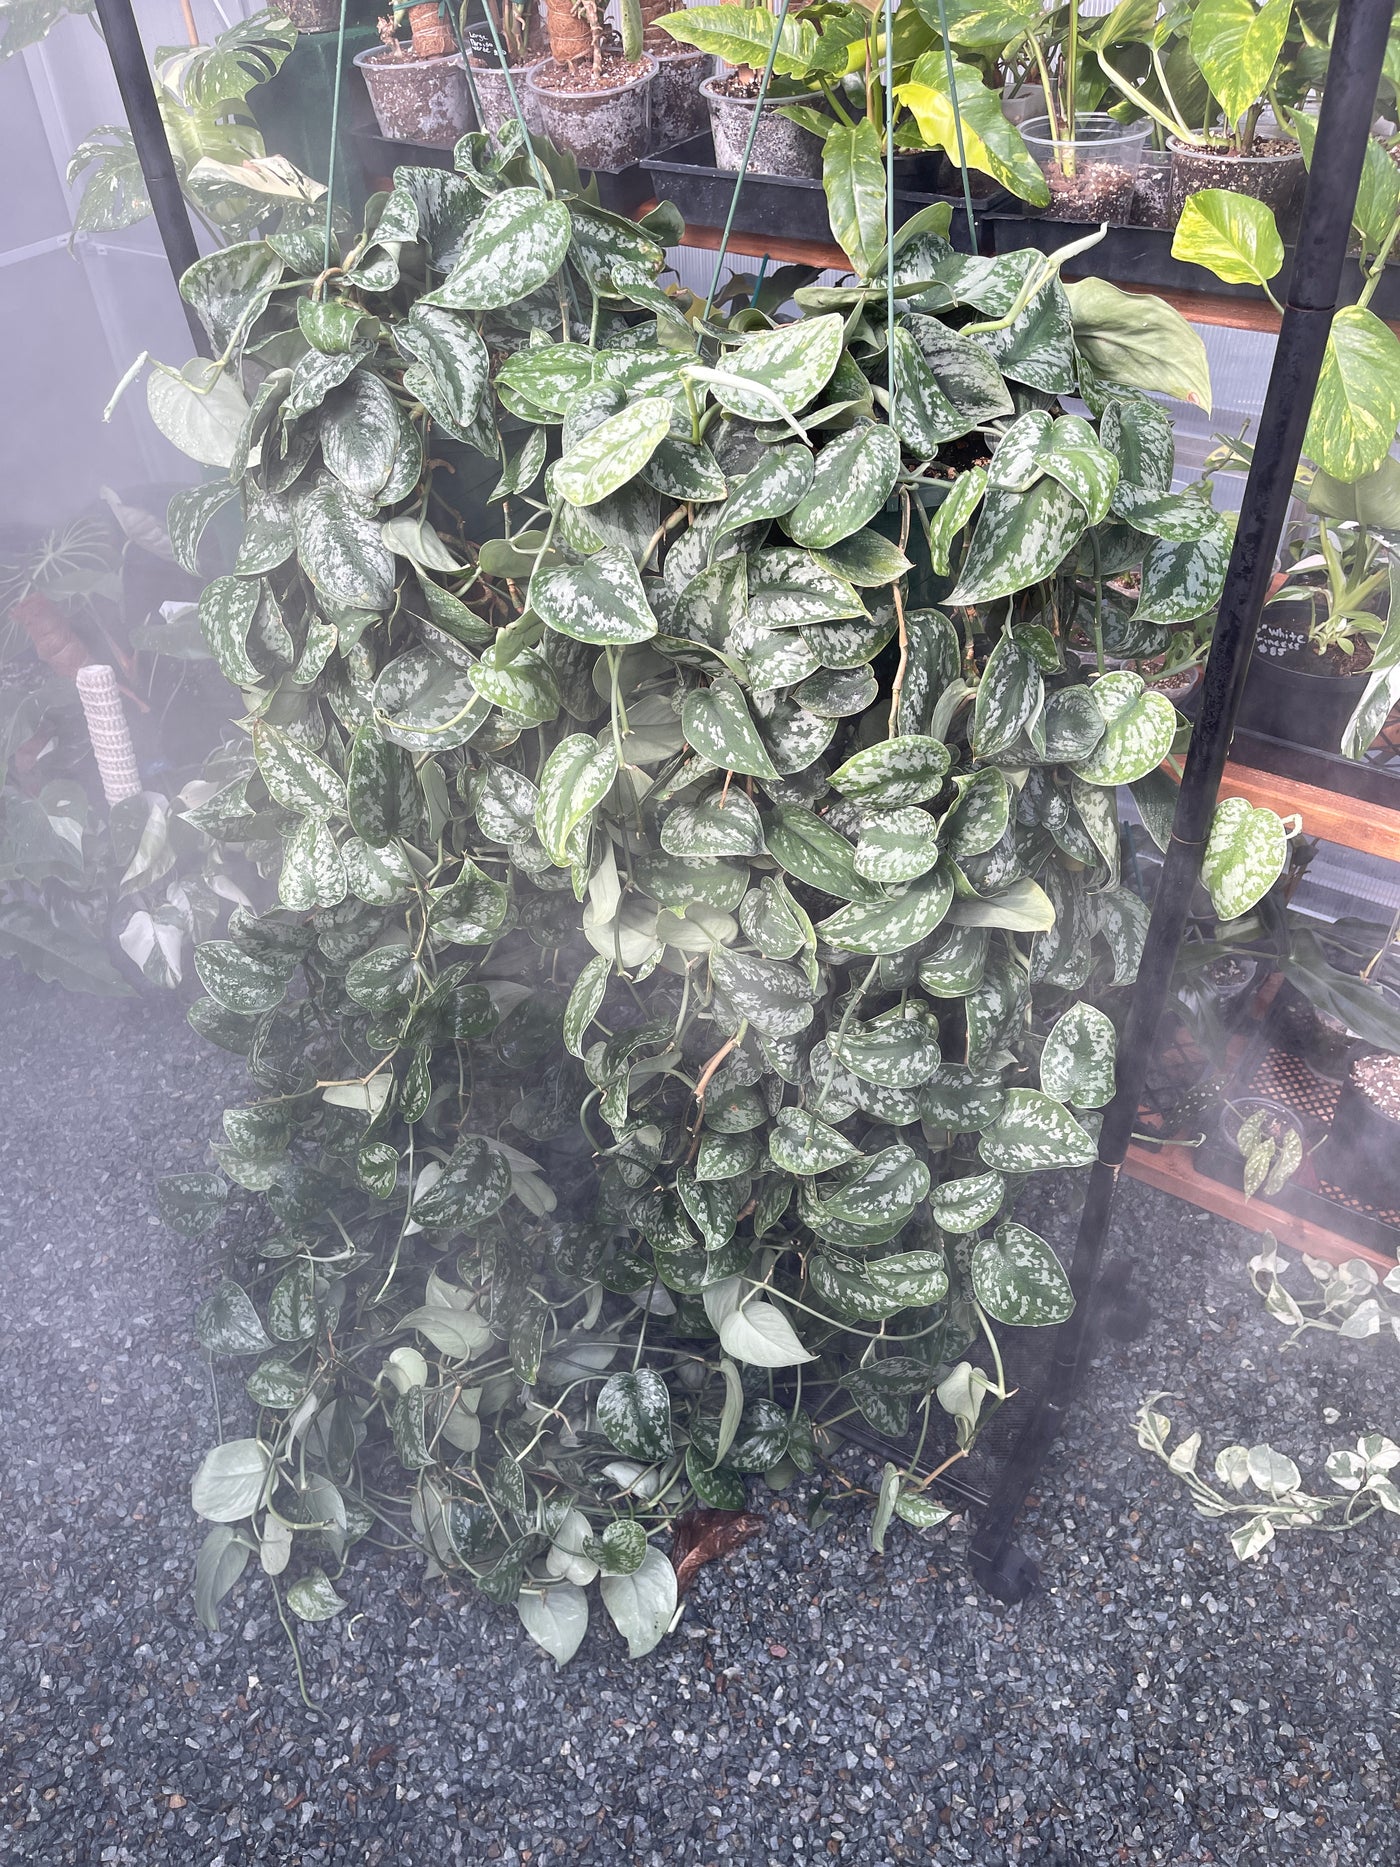 Extra Long Scindapsus Pictus Exotica for sale near me - San Diego california - Plant Vault - hanging houseplants